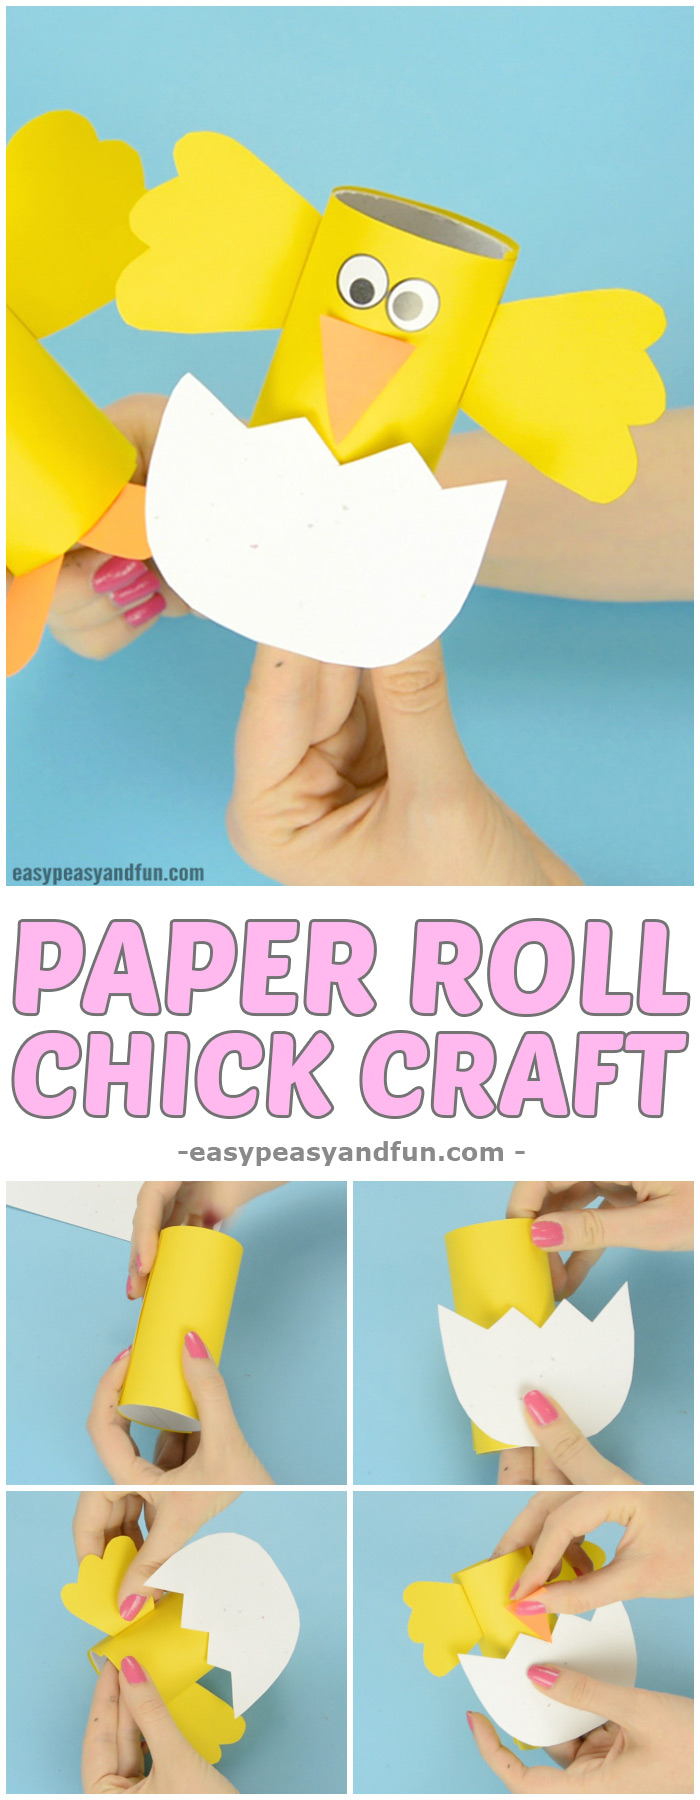 How to Make a Paper Scroll Craft